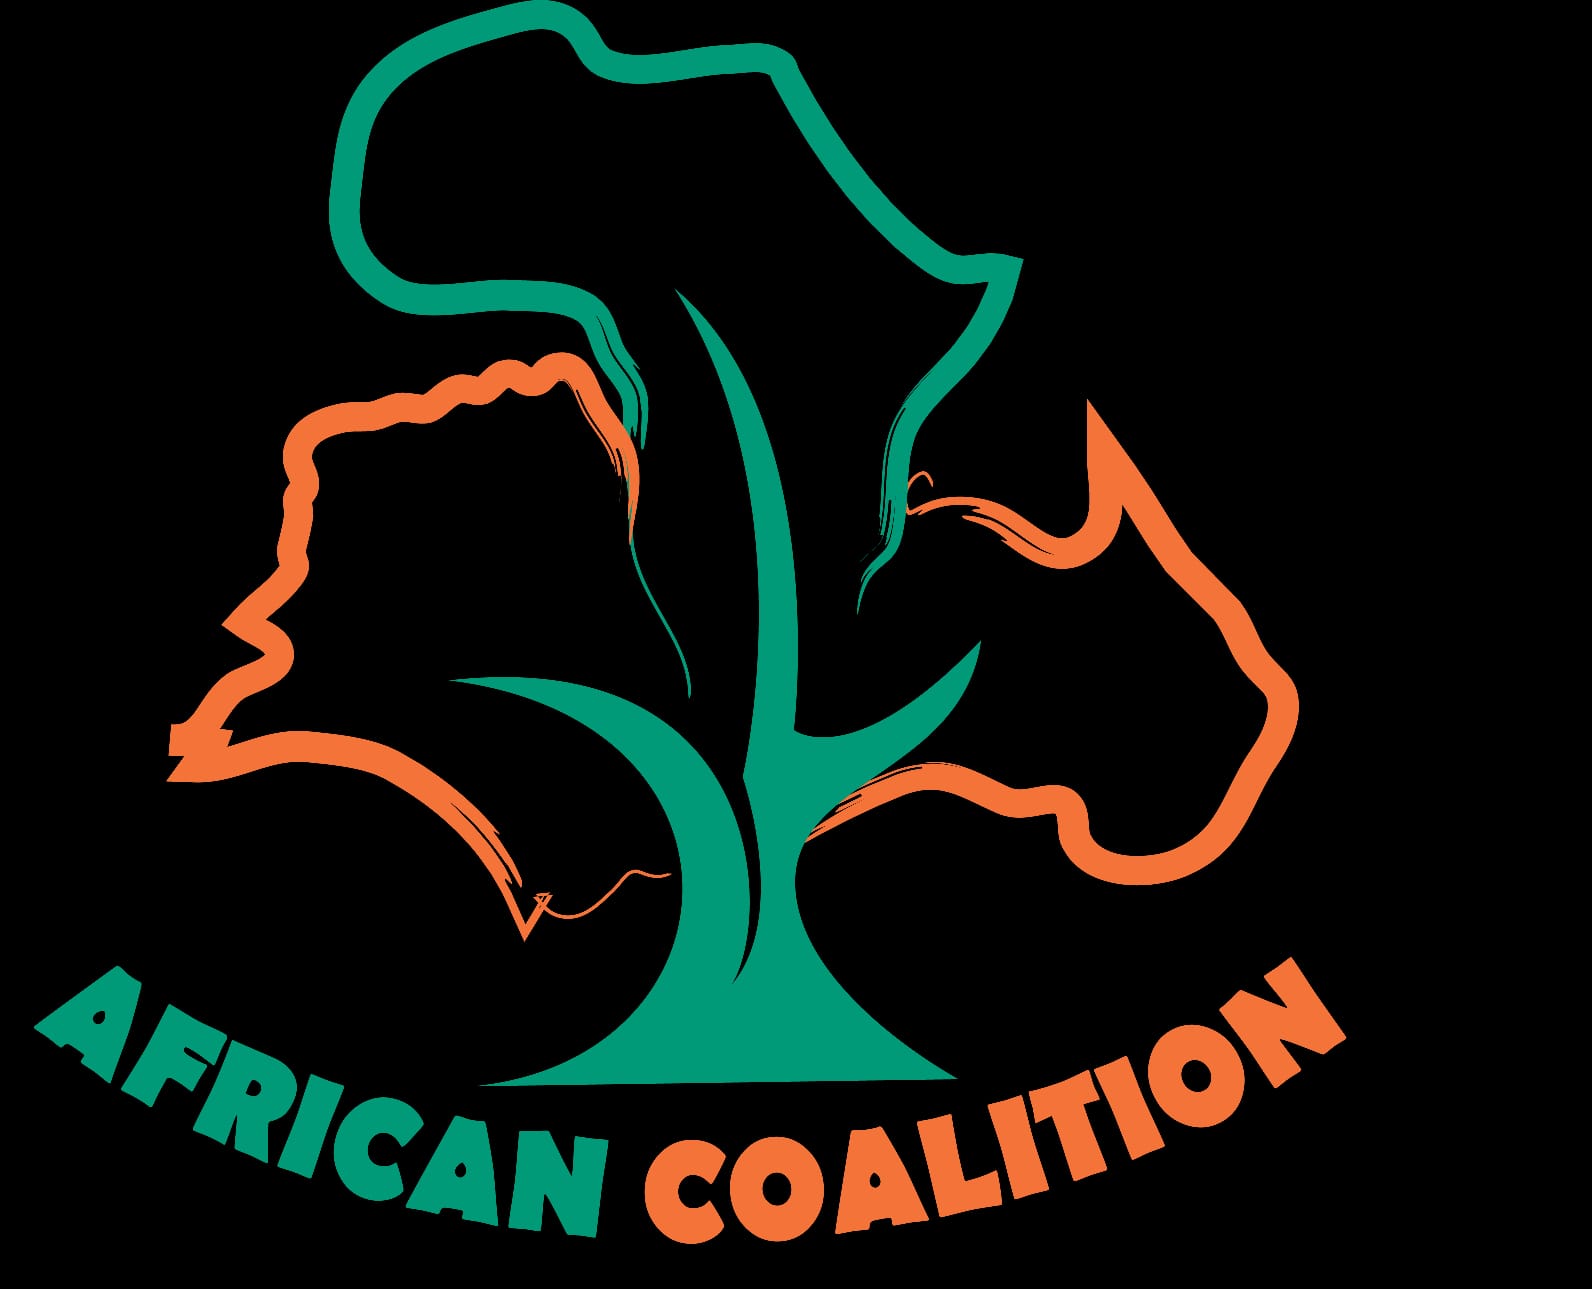 African Coalition Club of Canada